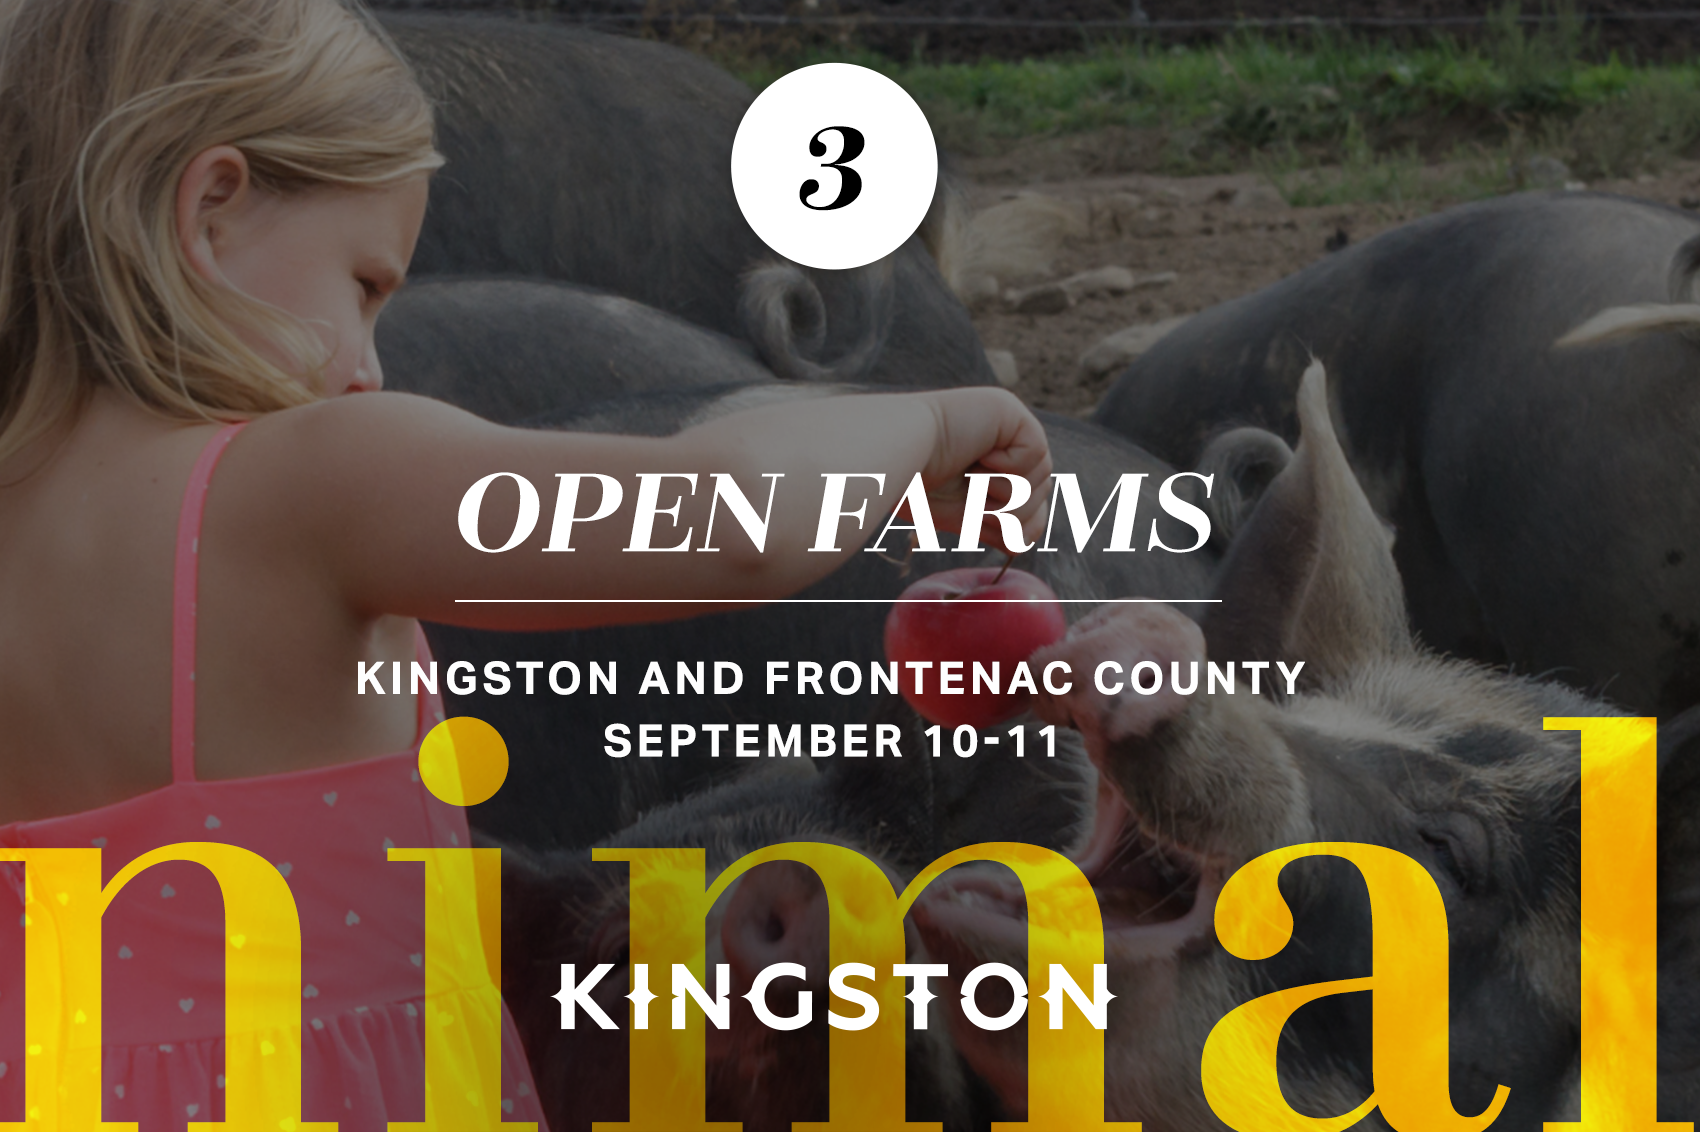 3. Open Farms: Kingston and Frontenac County September 10-11